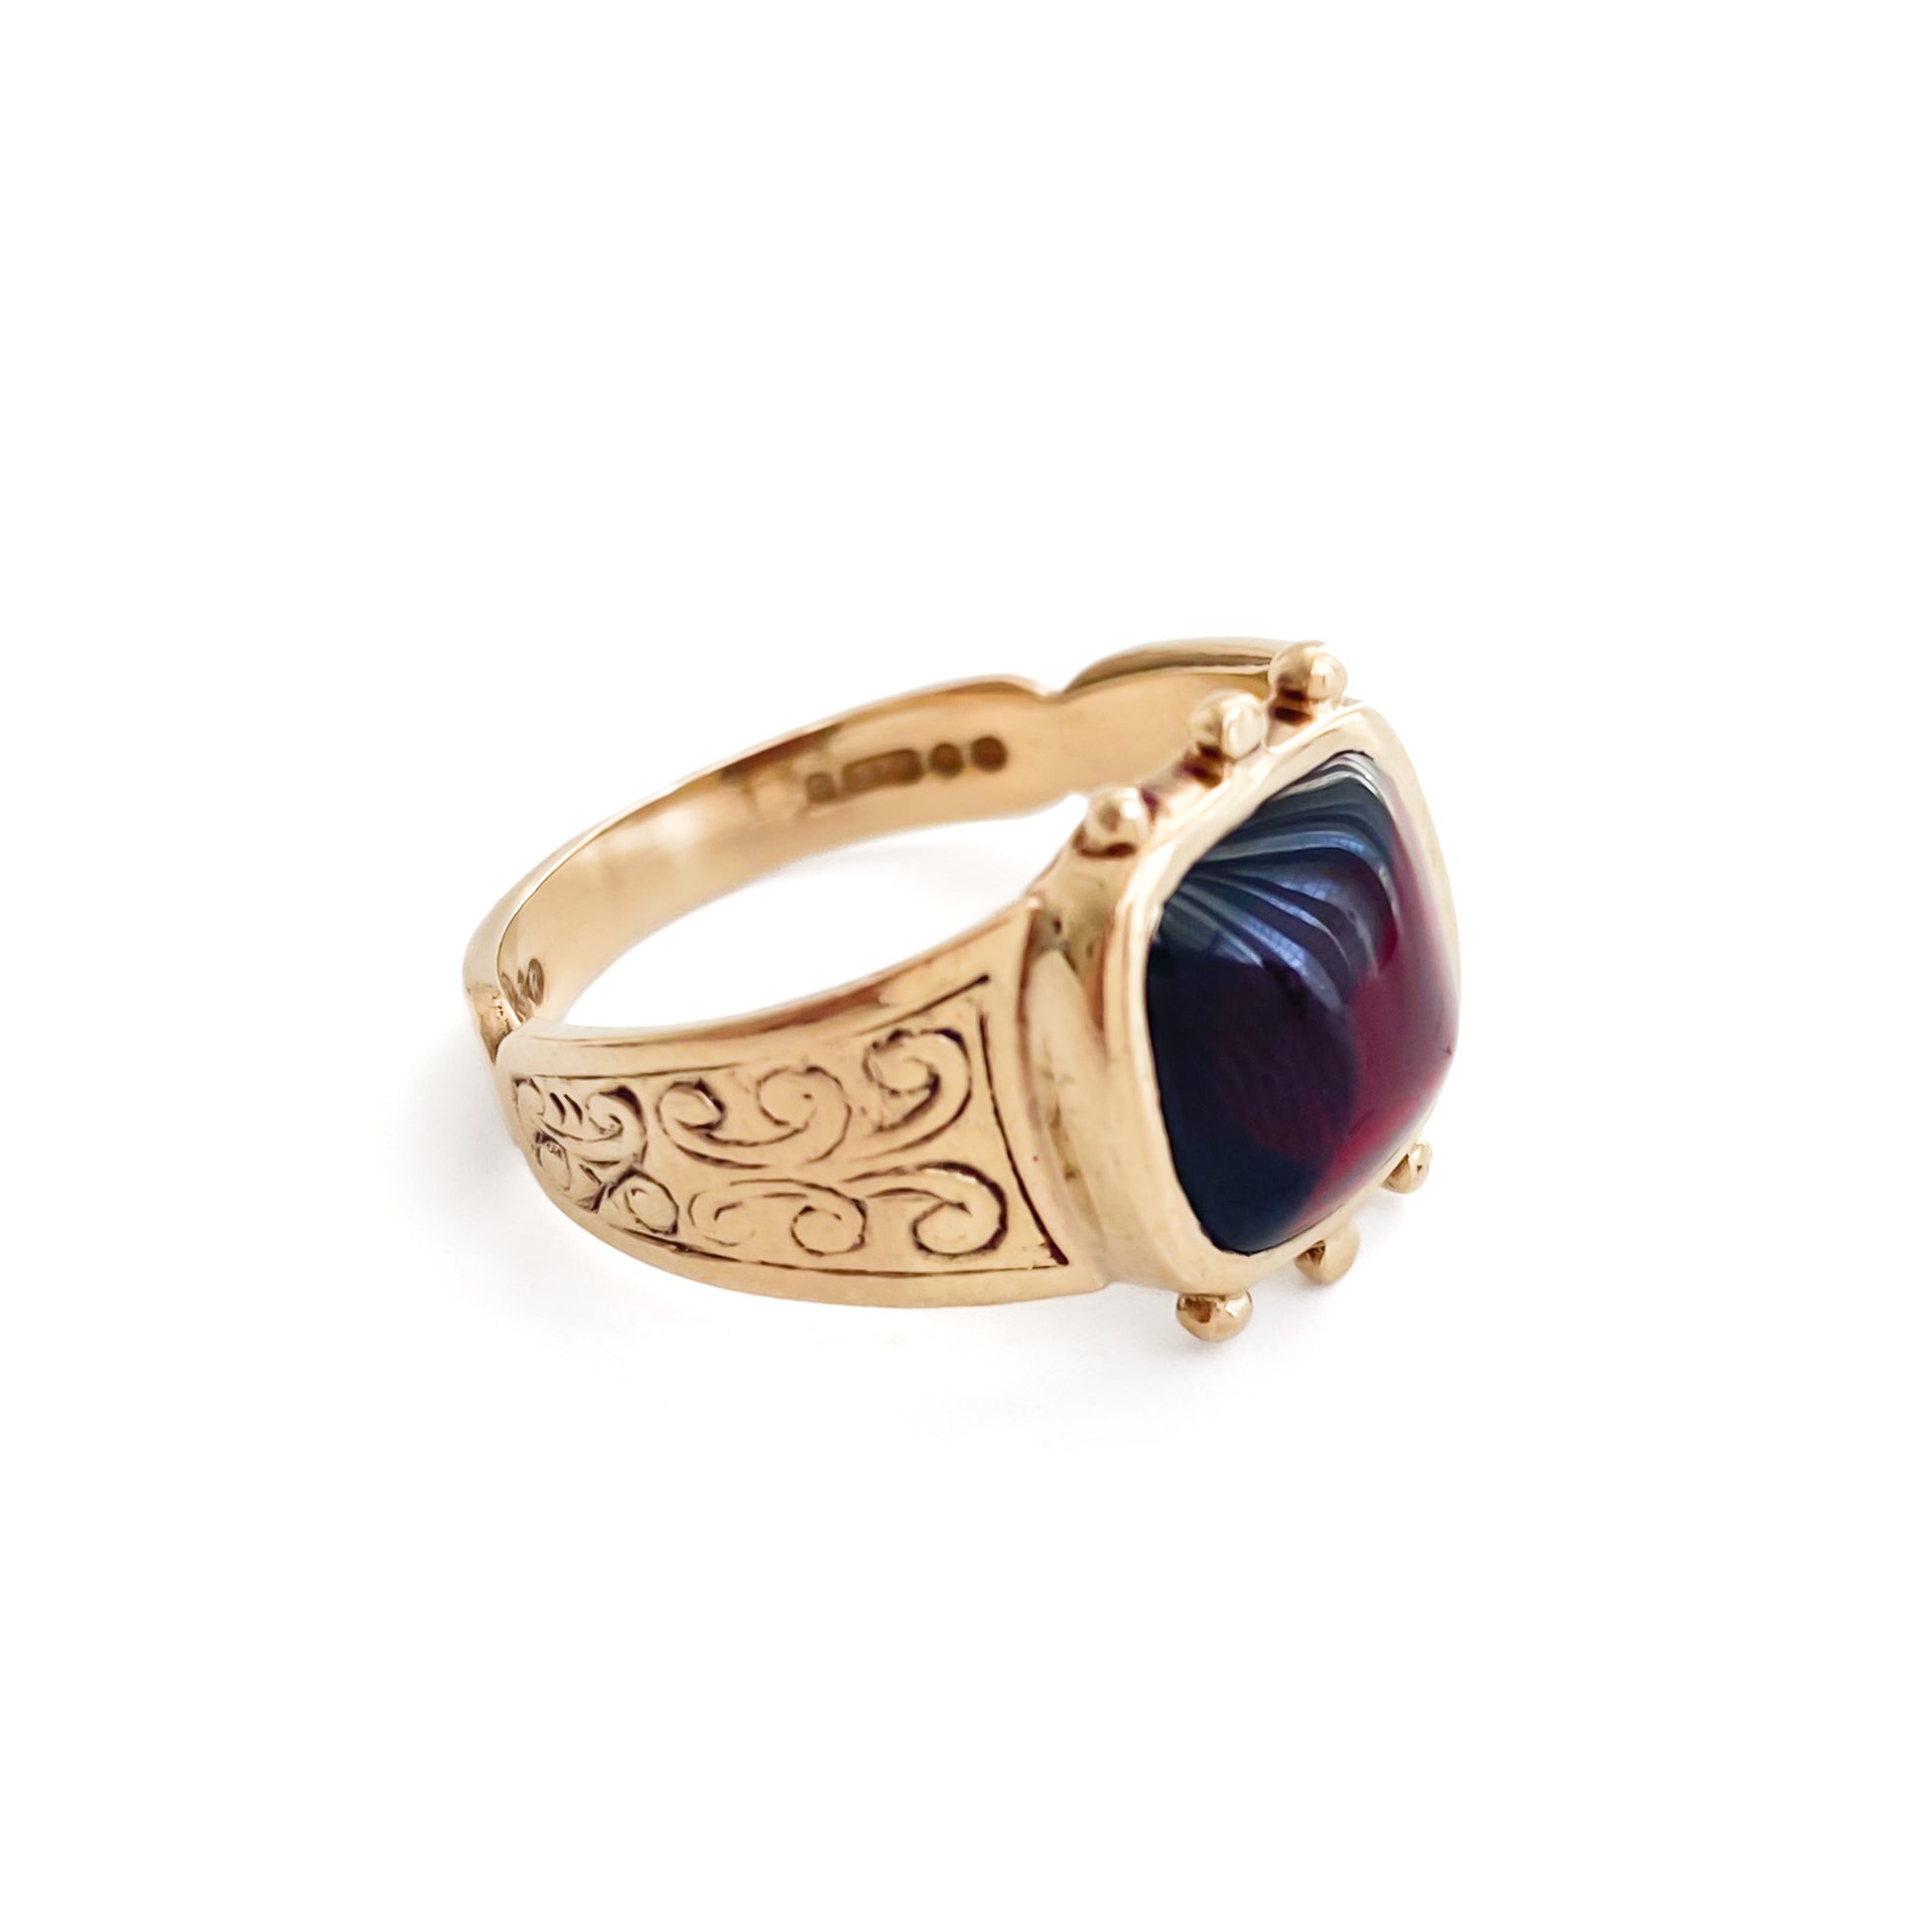 Edwardian 9ct gold ring with beautifully engraved shoulders and a deep red cabochon garnet. London